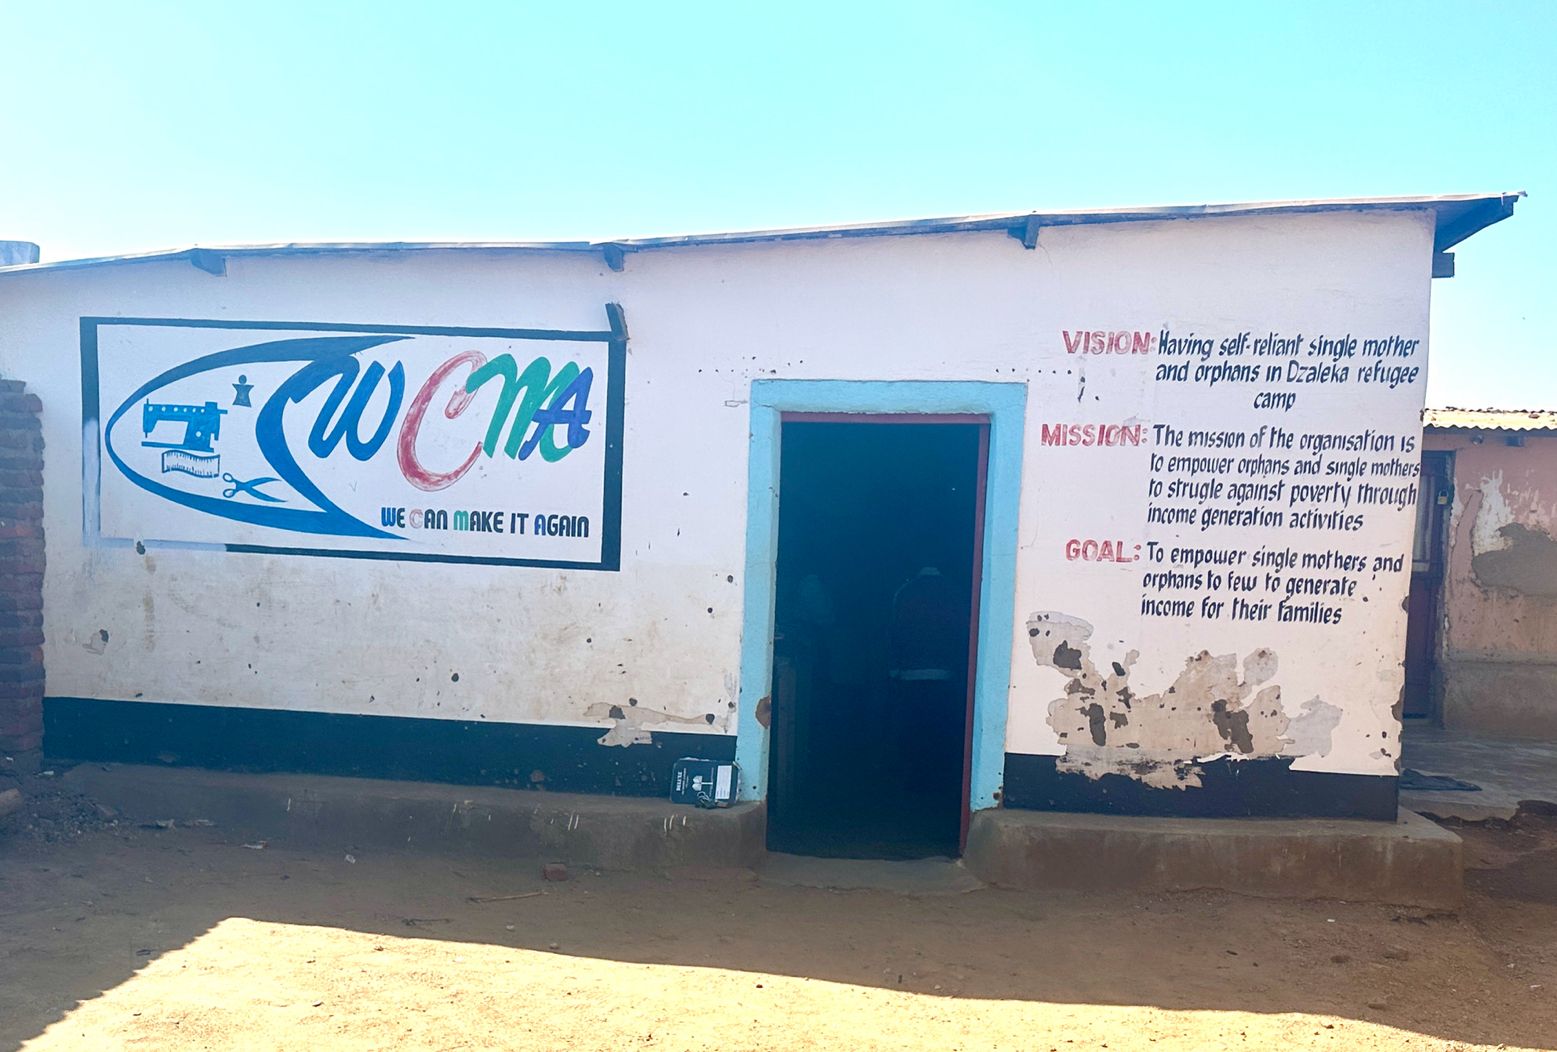 WCMA building - We Can Make it Again - a tailor shop where the menstrual products are made